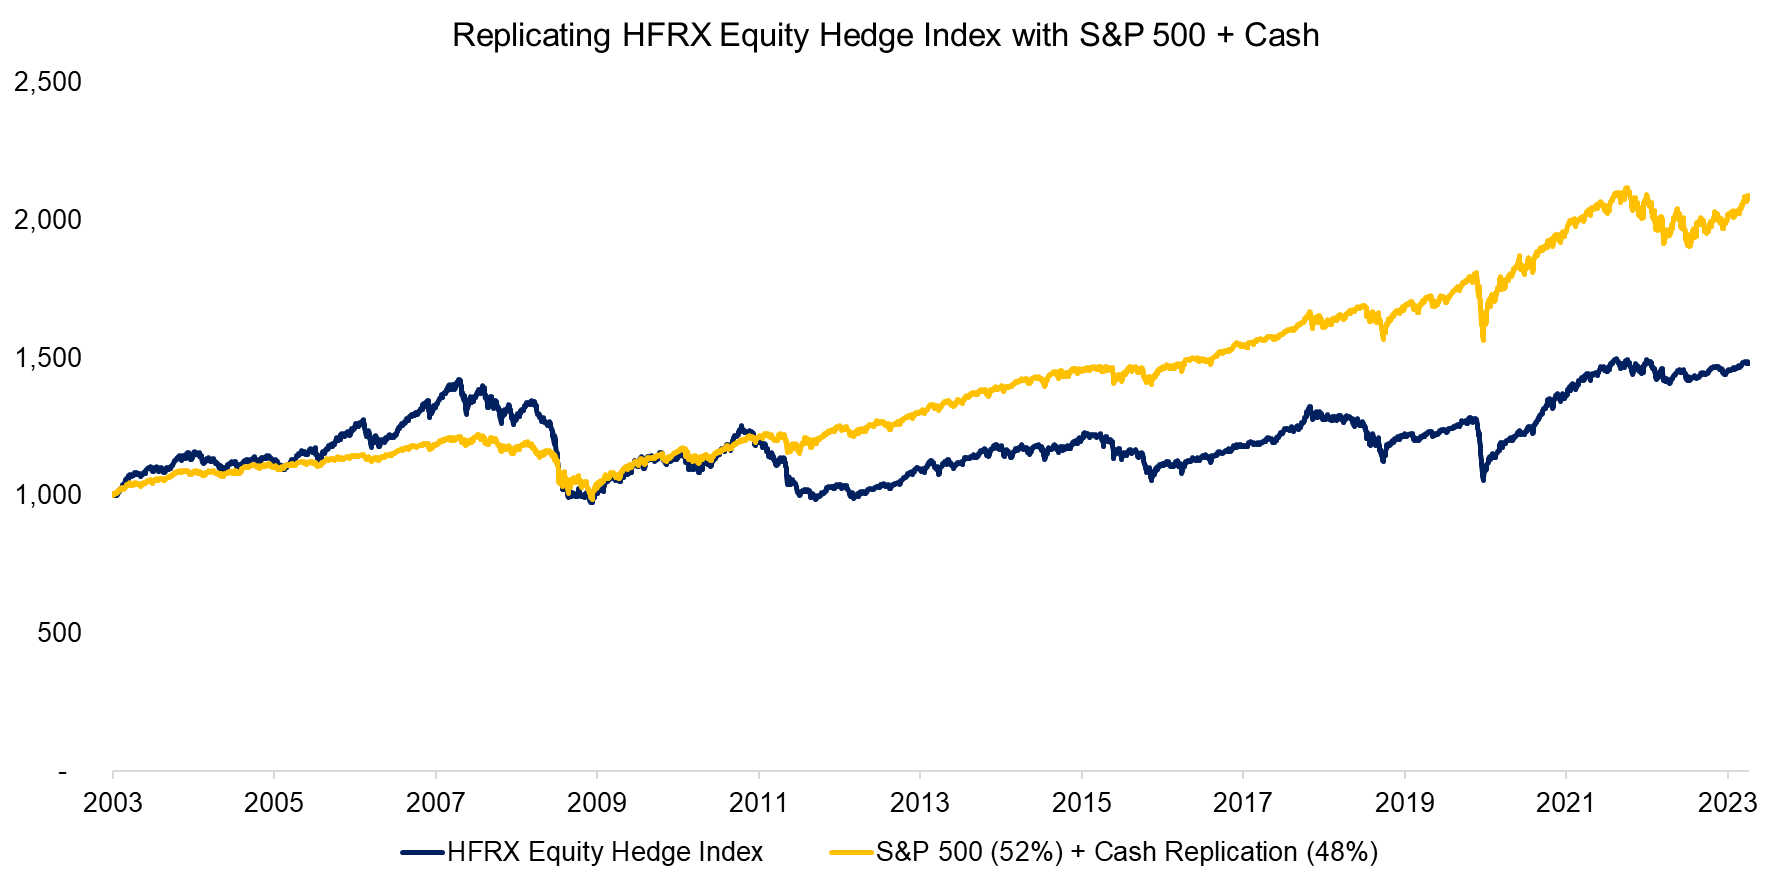 Replicating HFRX Equity Hedge Index with S&P 500 + Cash